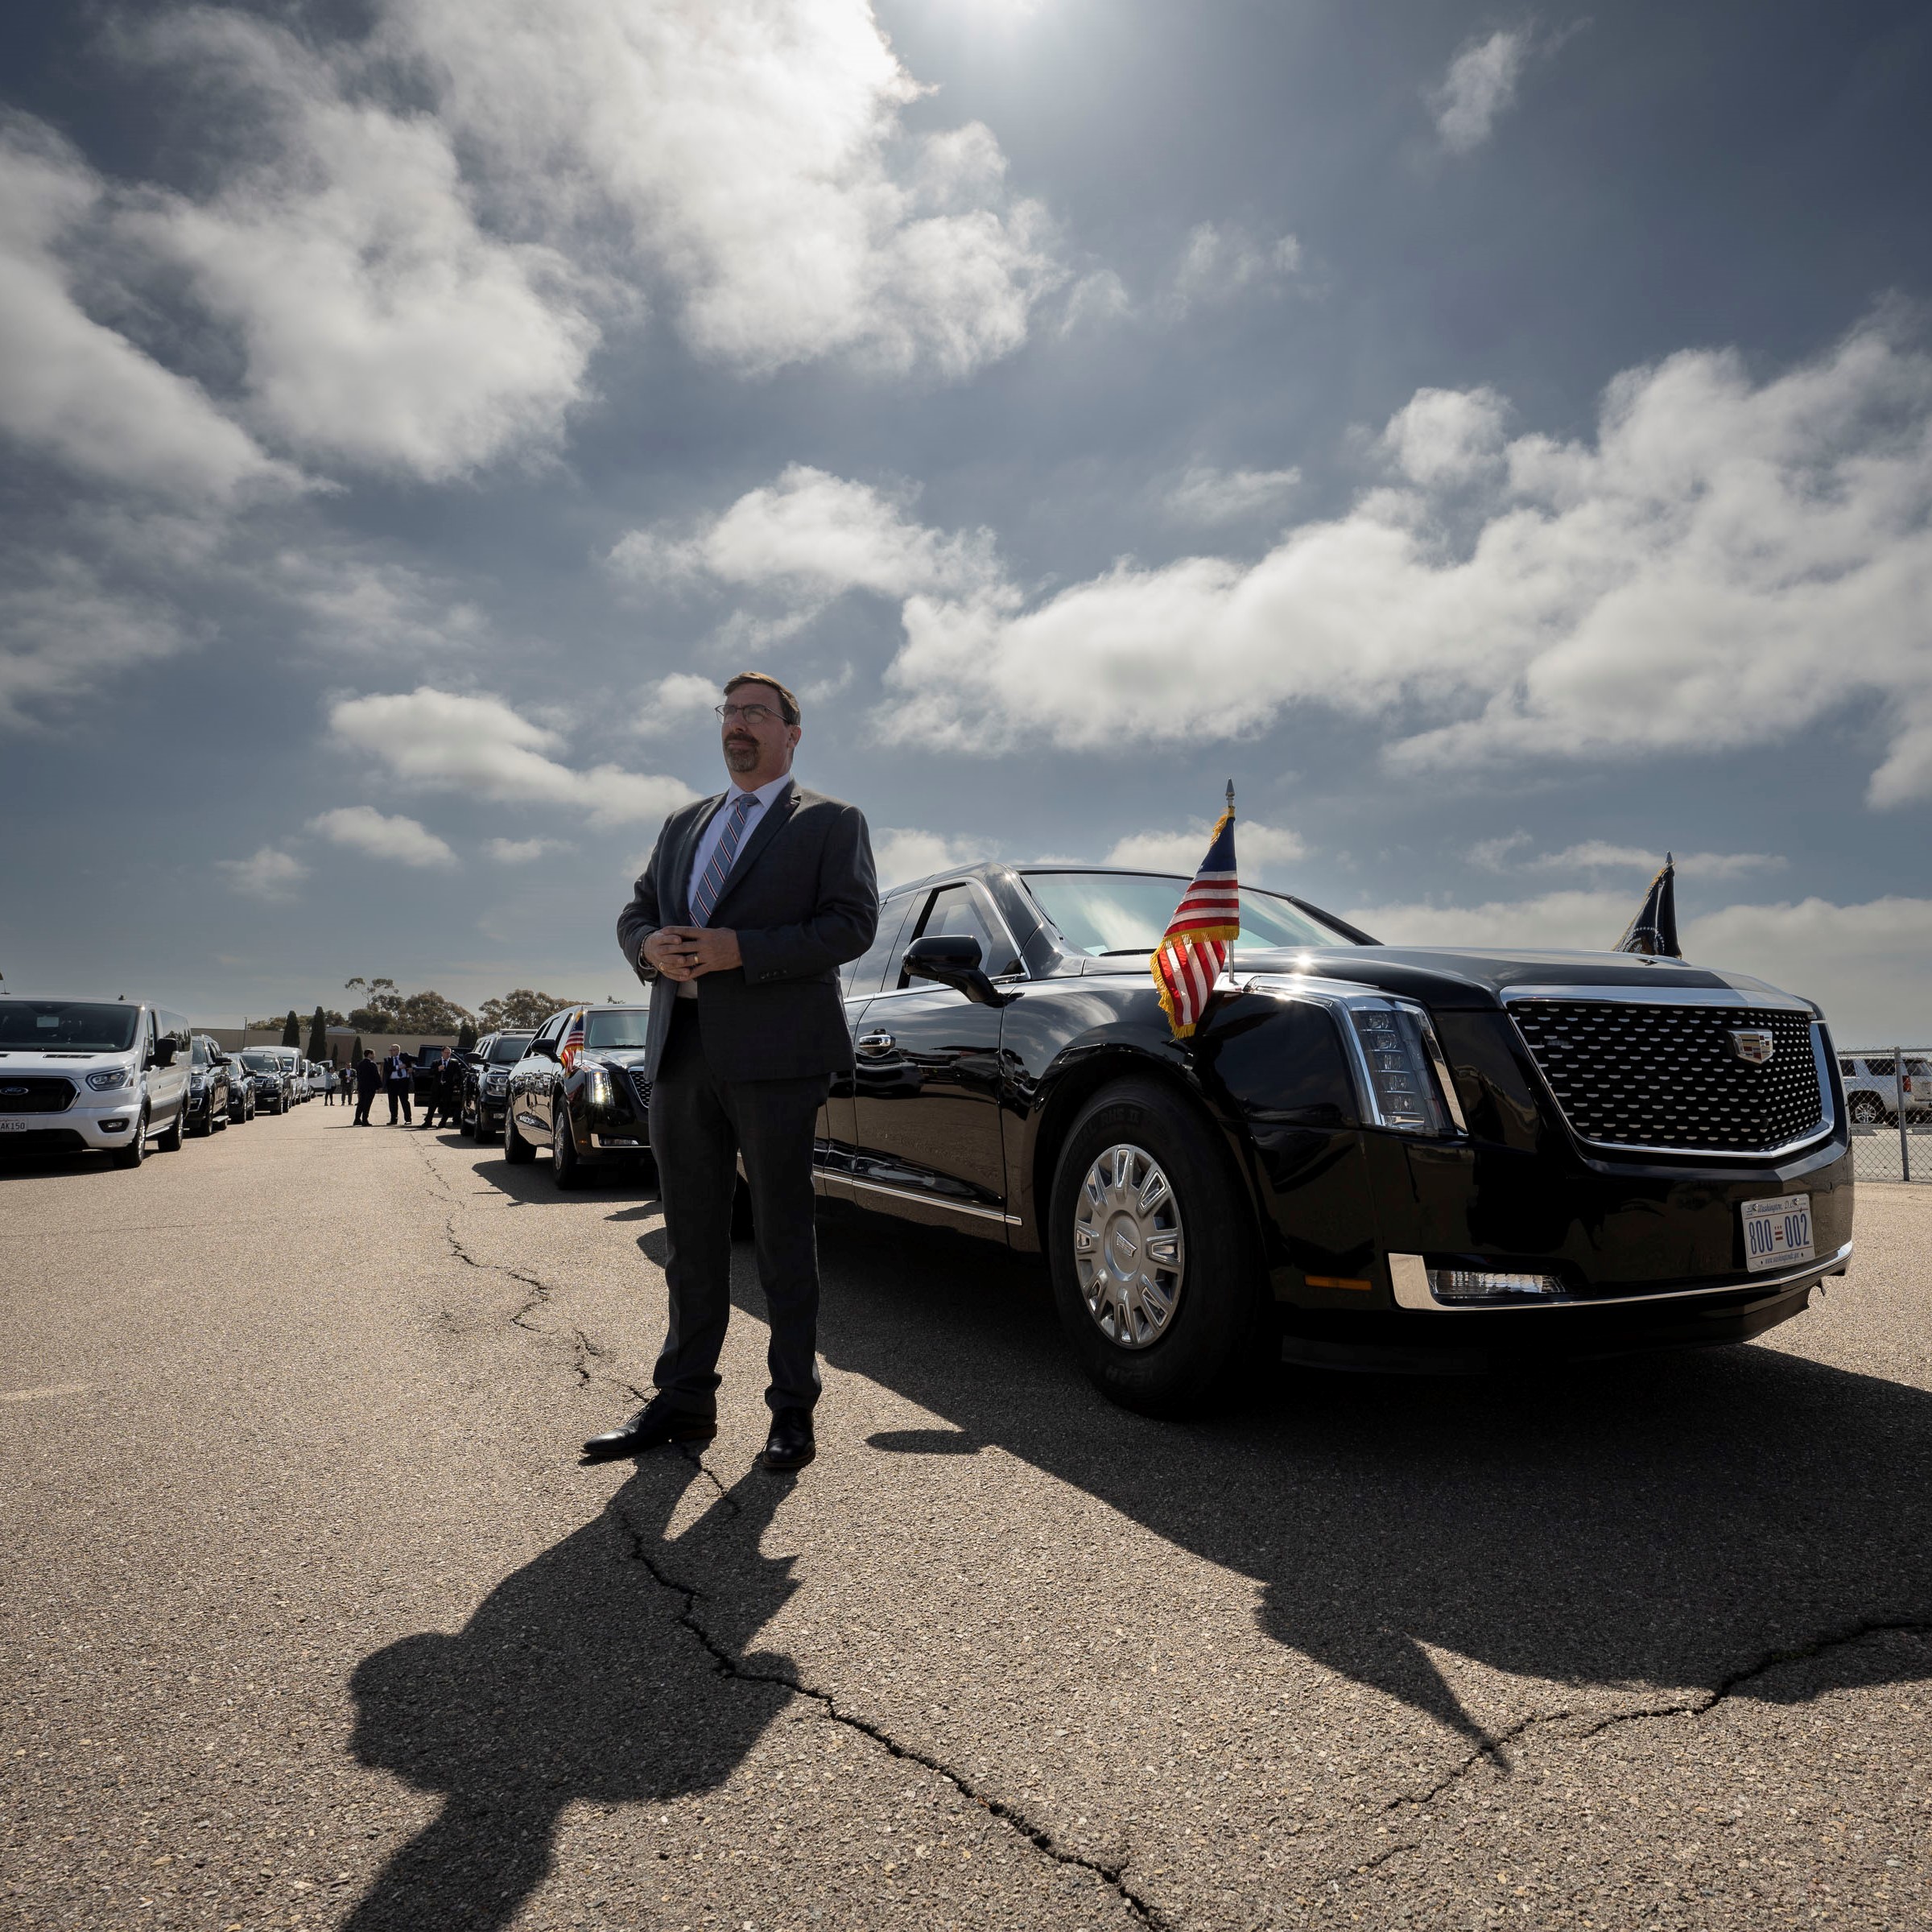 Agent standing in front of presidential vehicle